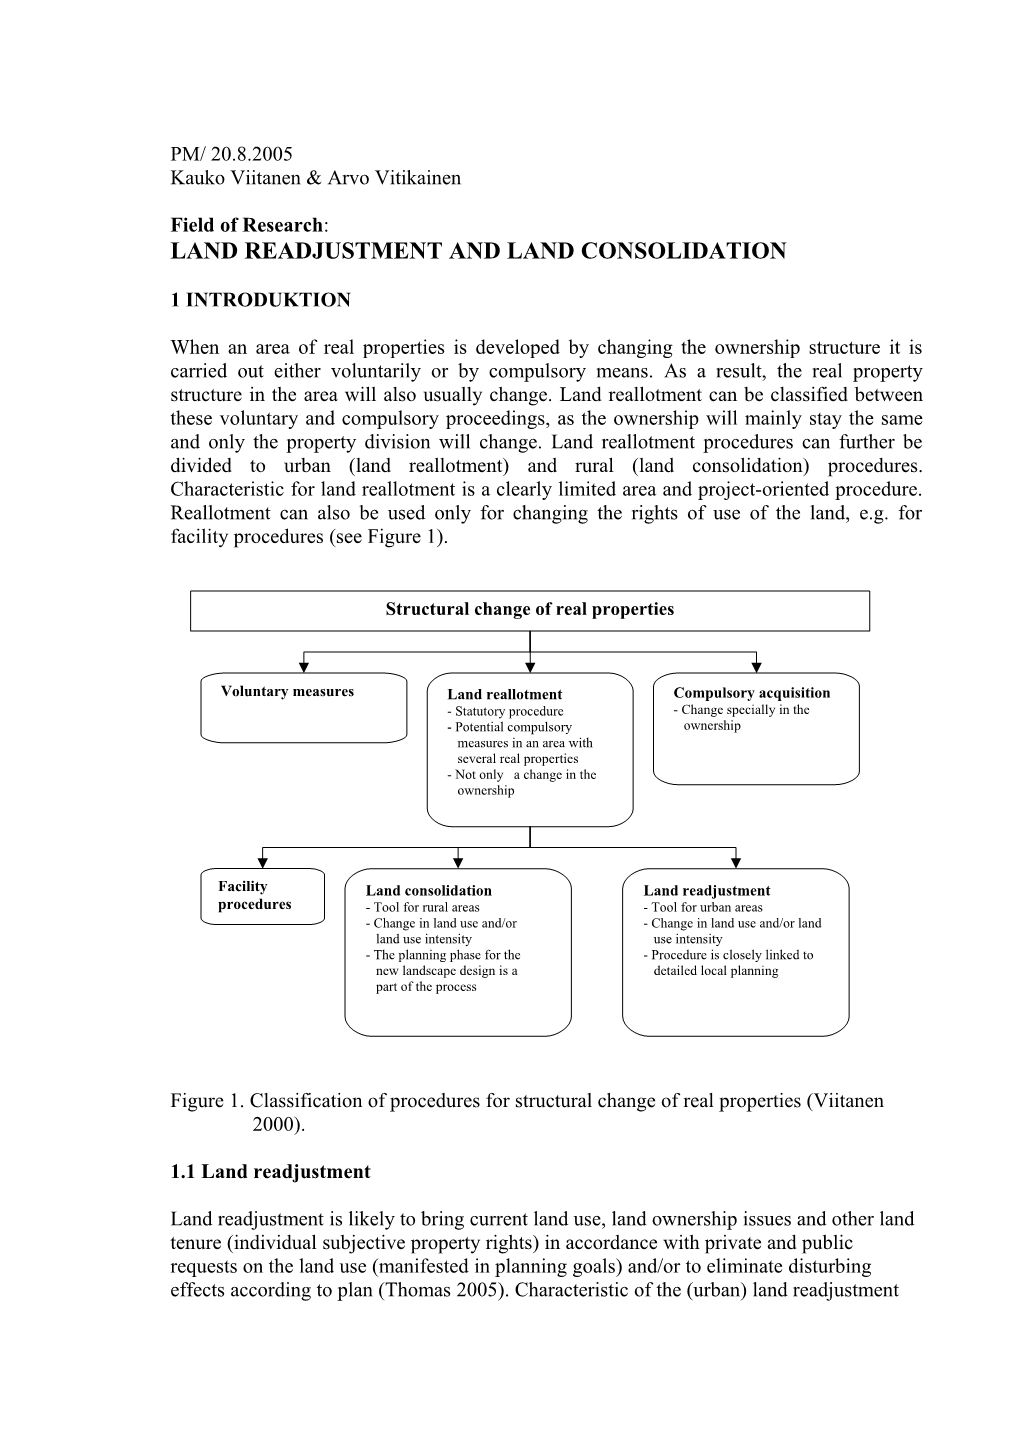 Land Readjustment and Land Consolidation